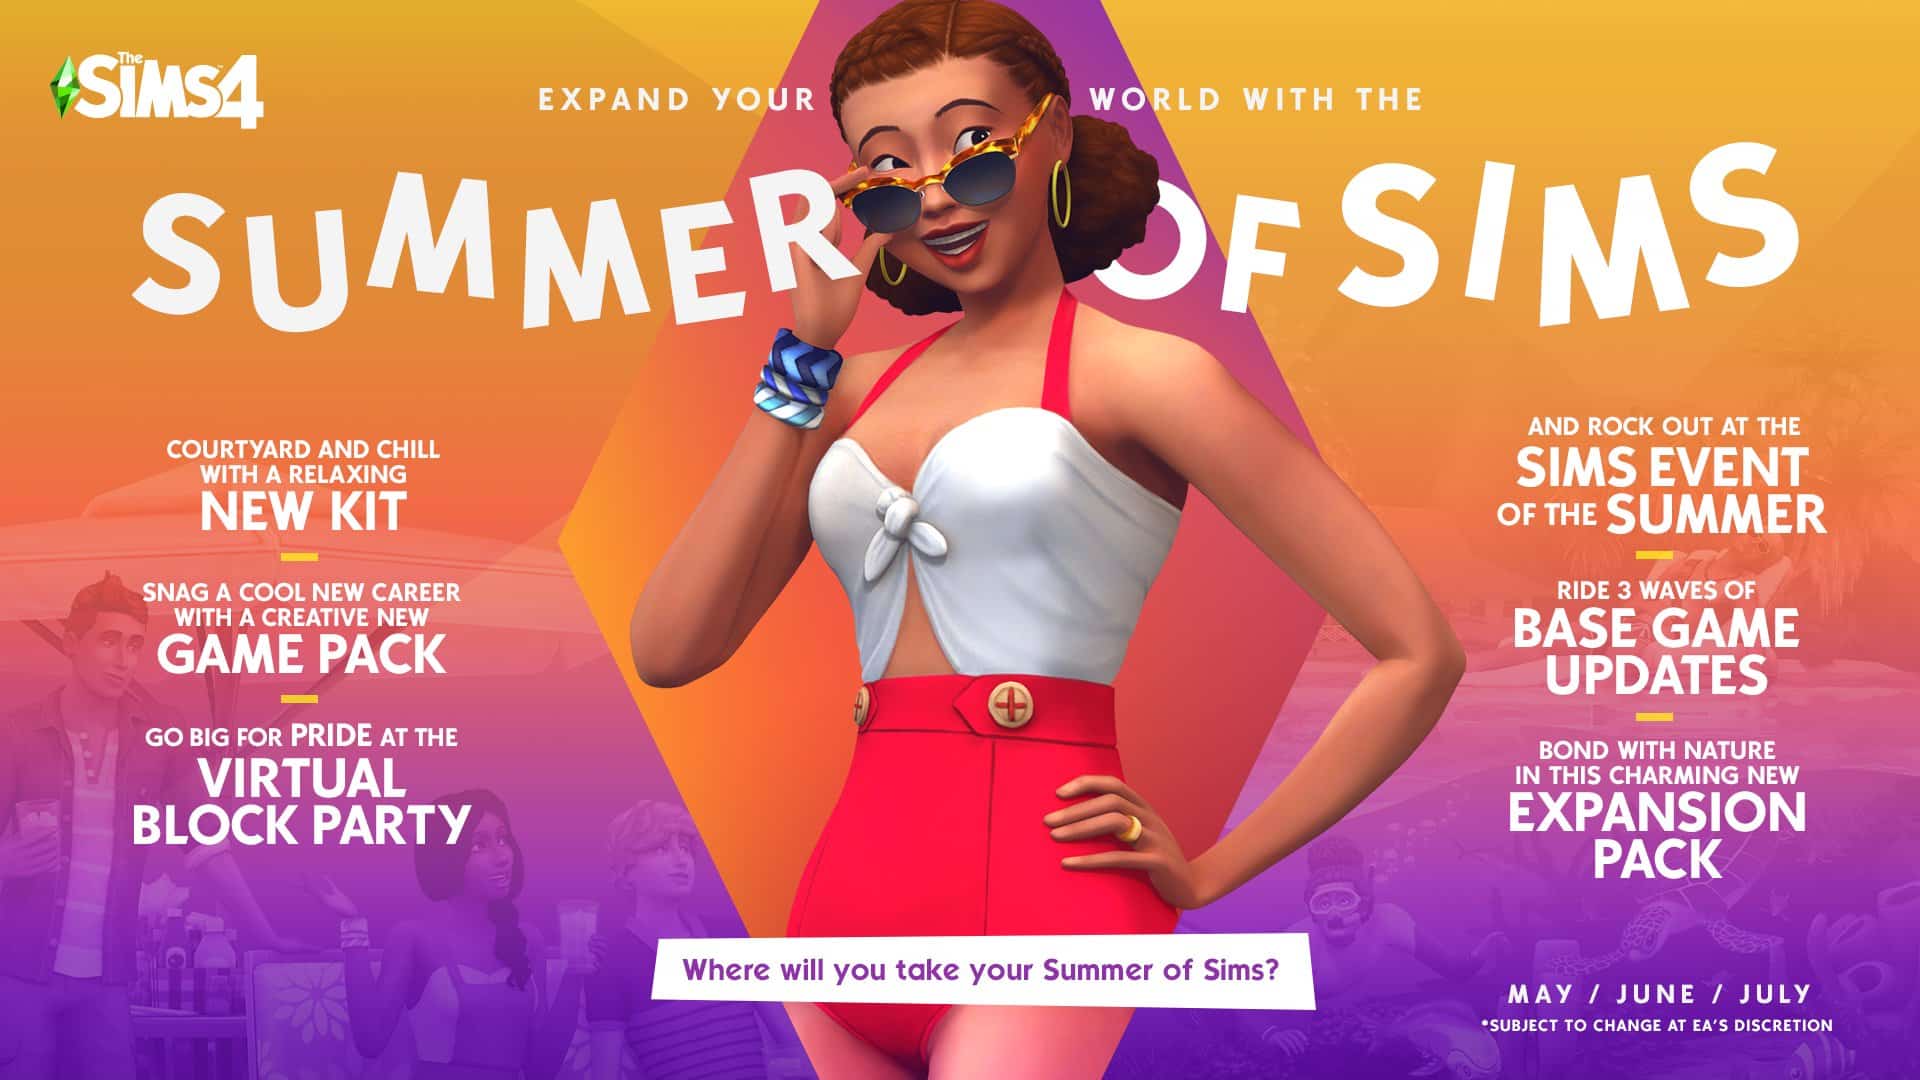 Summer of Sims 4 expansion